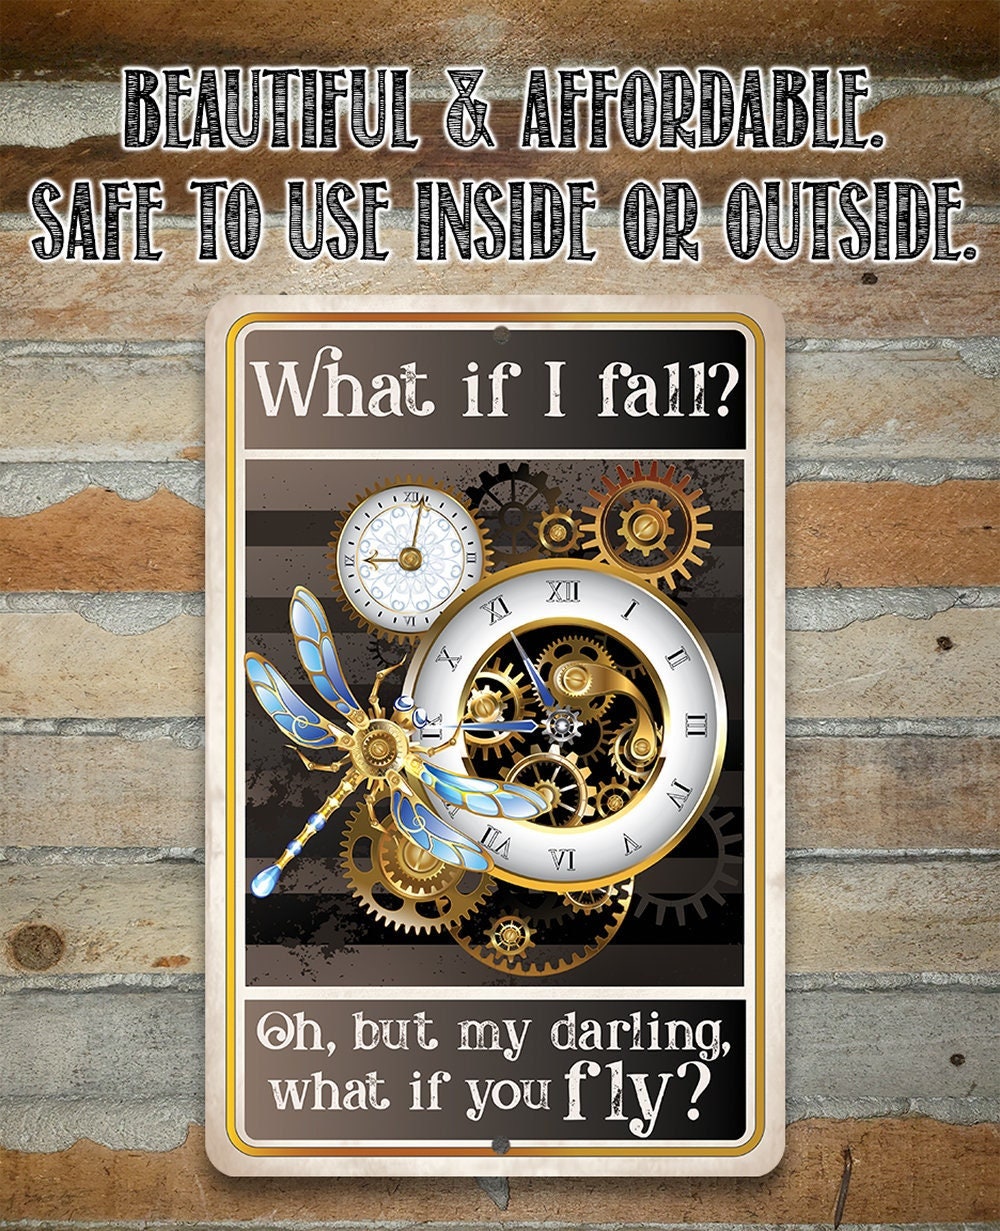 What If I Fall, Oh But My Darling, What If You Fly - 8" x 12" or 12" x 18" Aluminum Tin Awesome Metal Poster Lone Star Art 